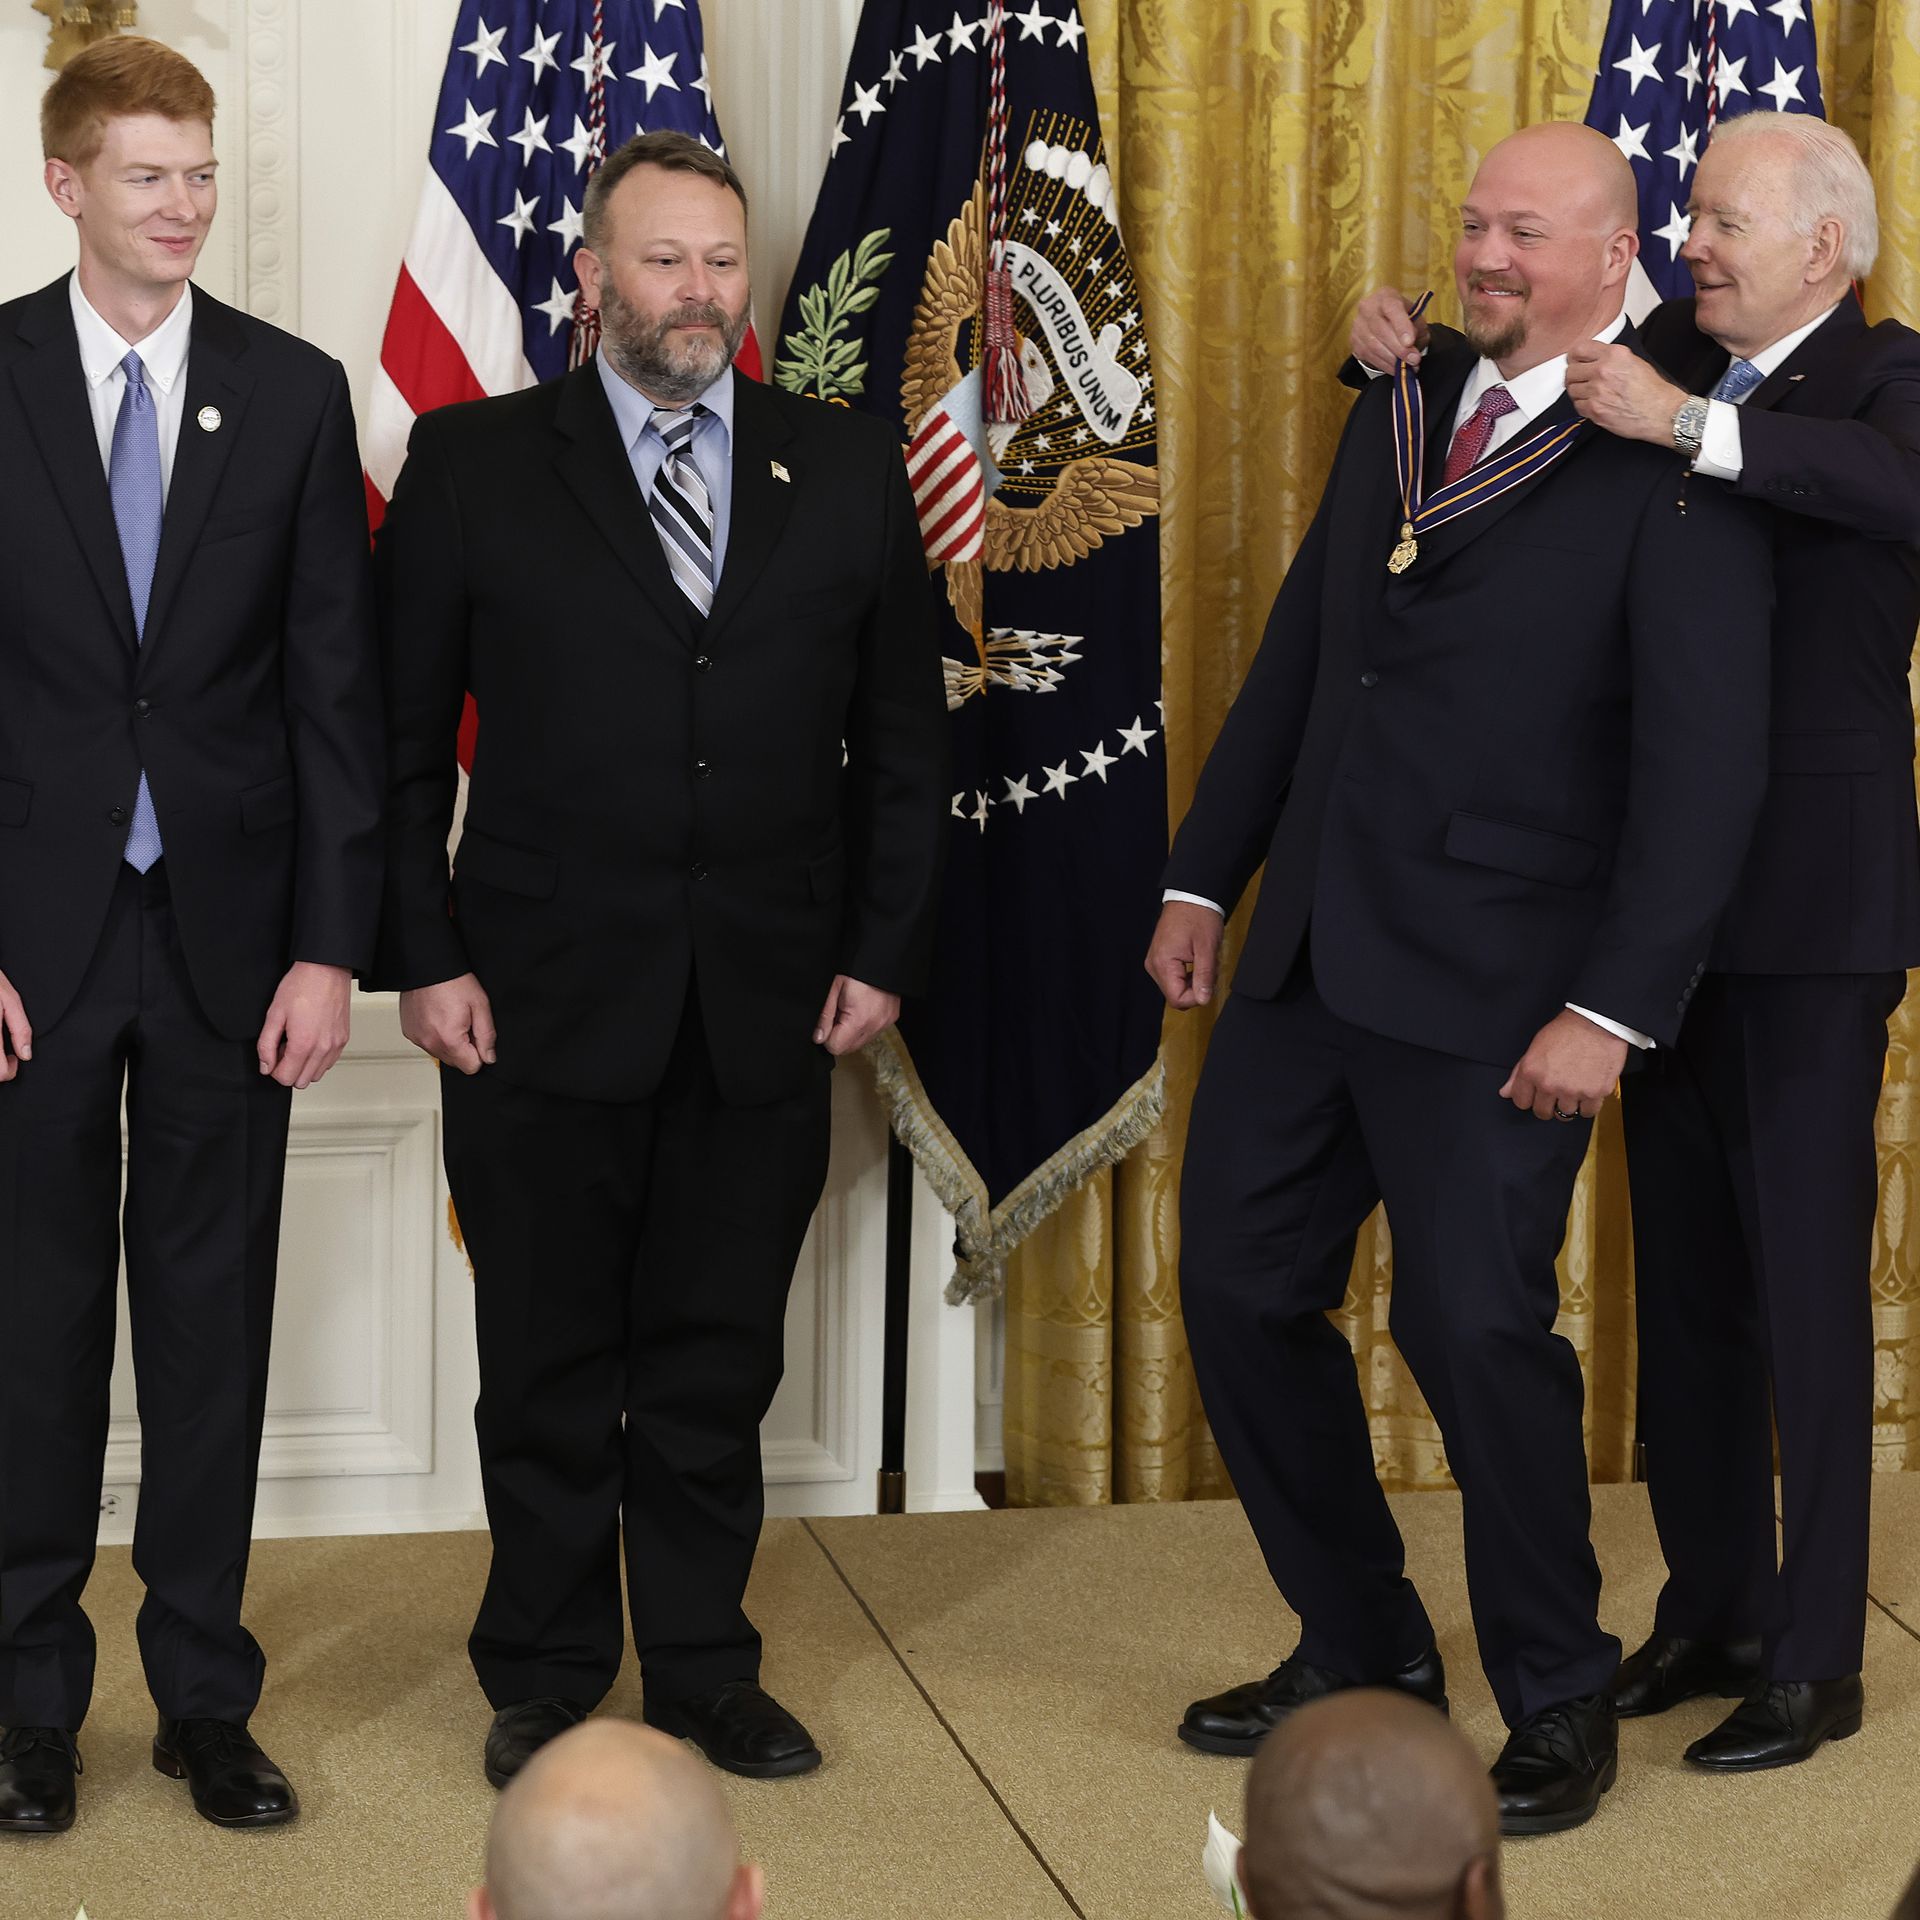 President Biden is seen awarding medals of valor to public safety officials.